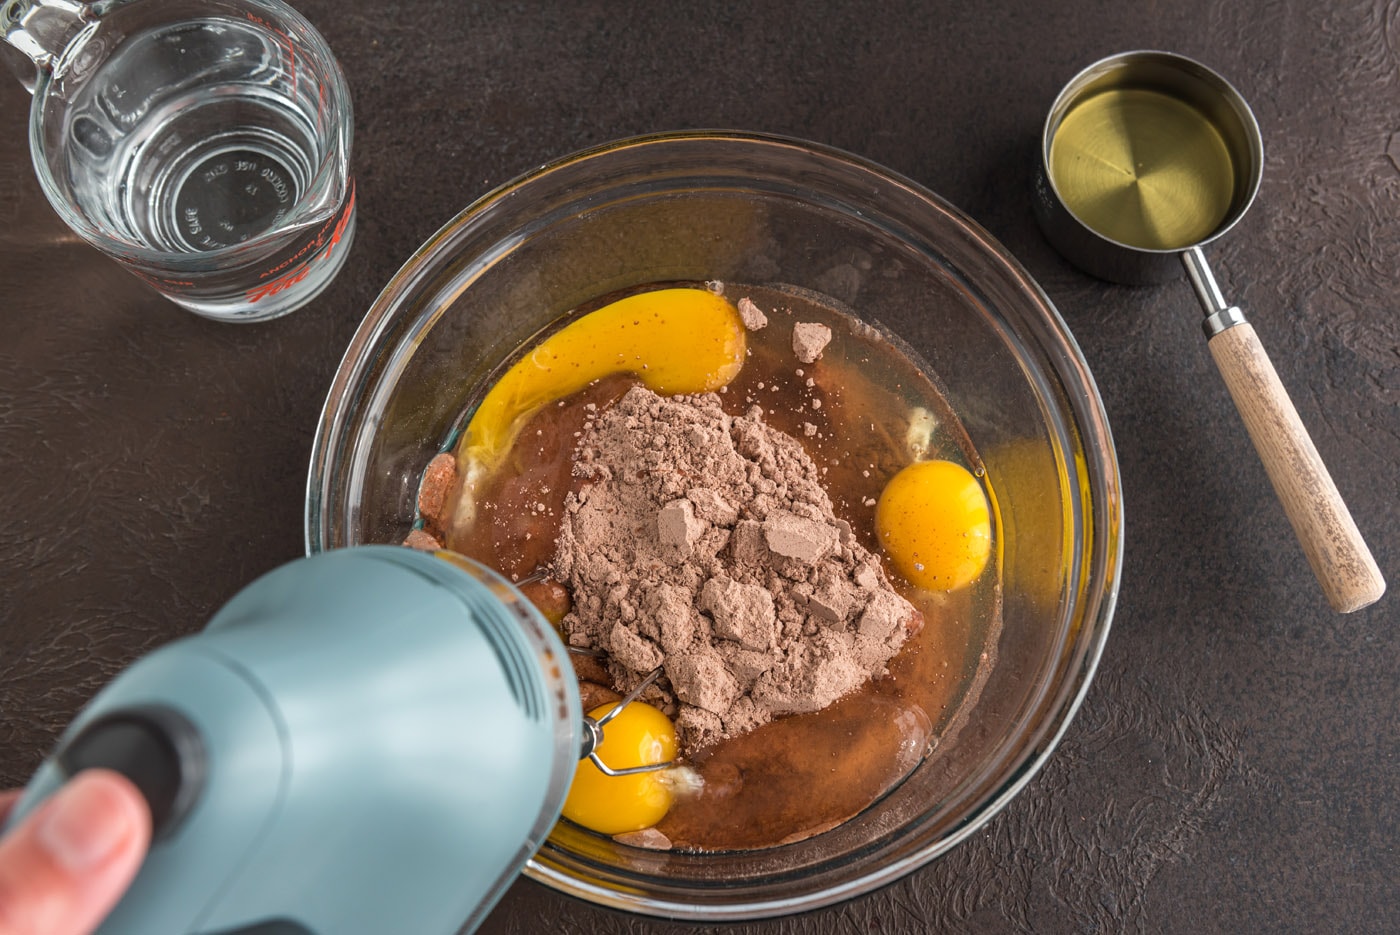 mixing cake mix with eggs, oil, and water with an electric mixer